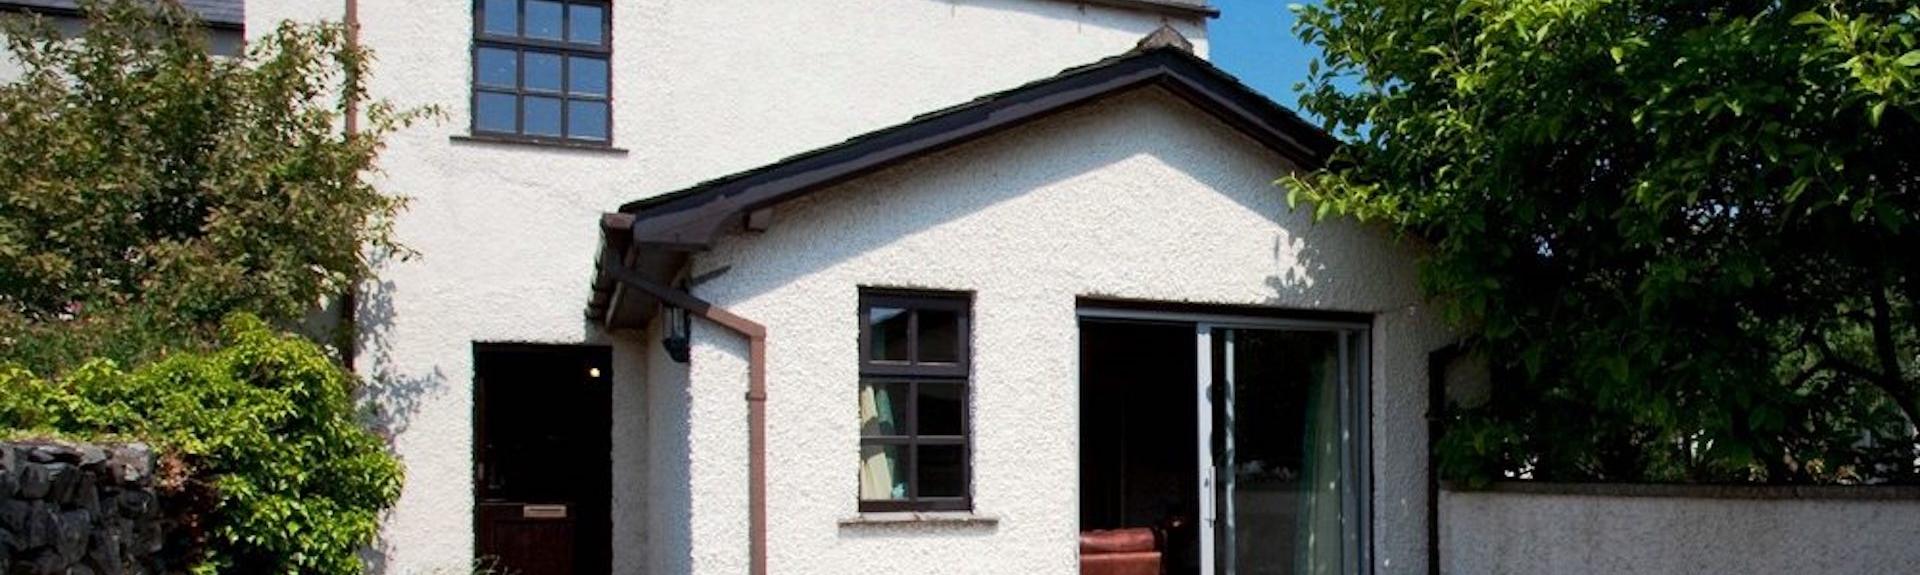 Exterior of a holiday cottage in Cark-in-Cartmell overlooking a small patio and lawn.